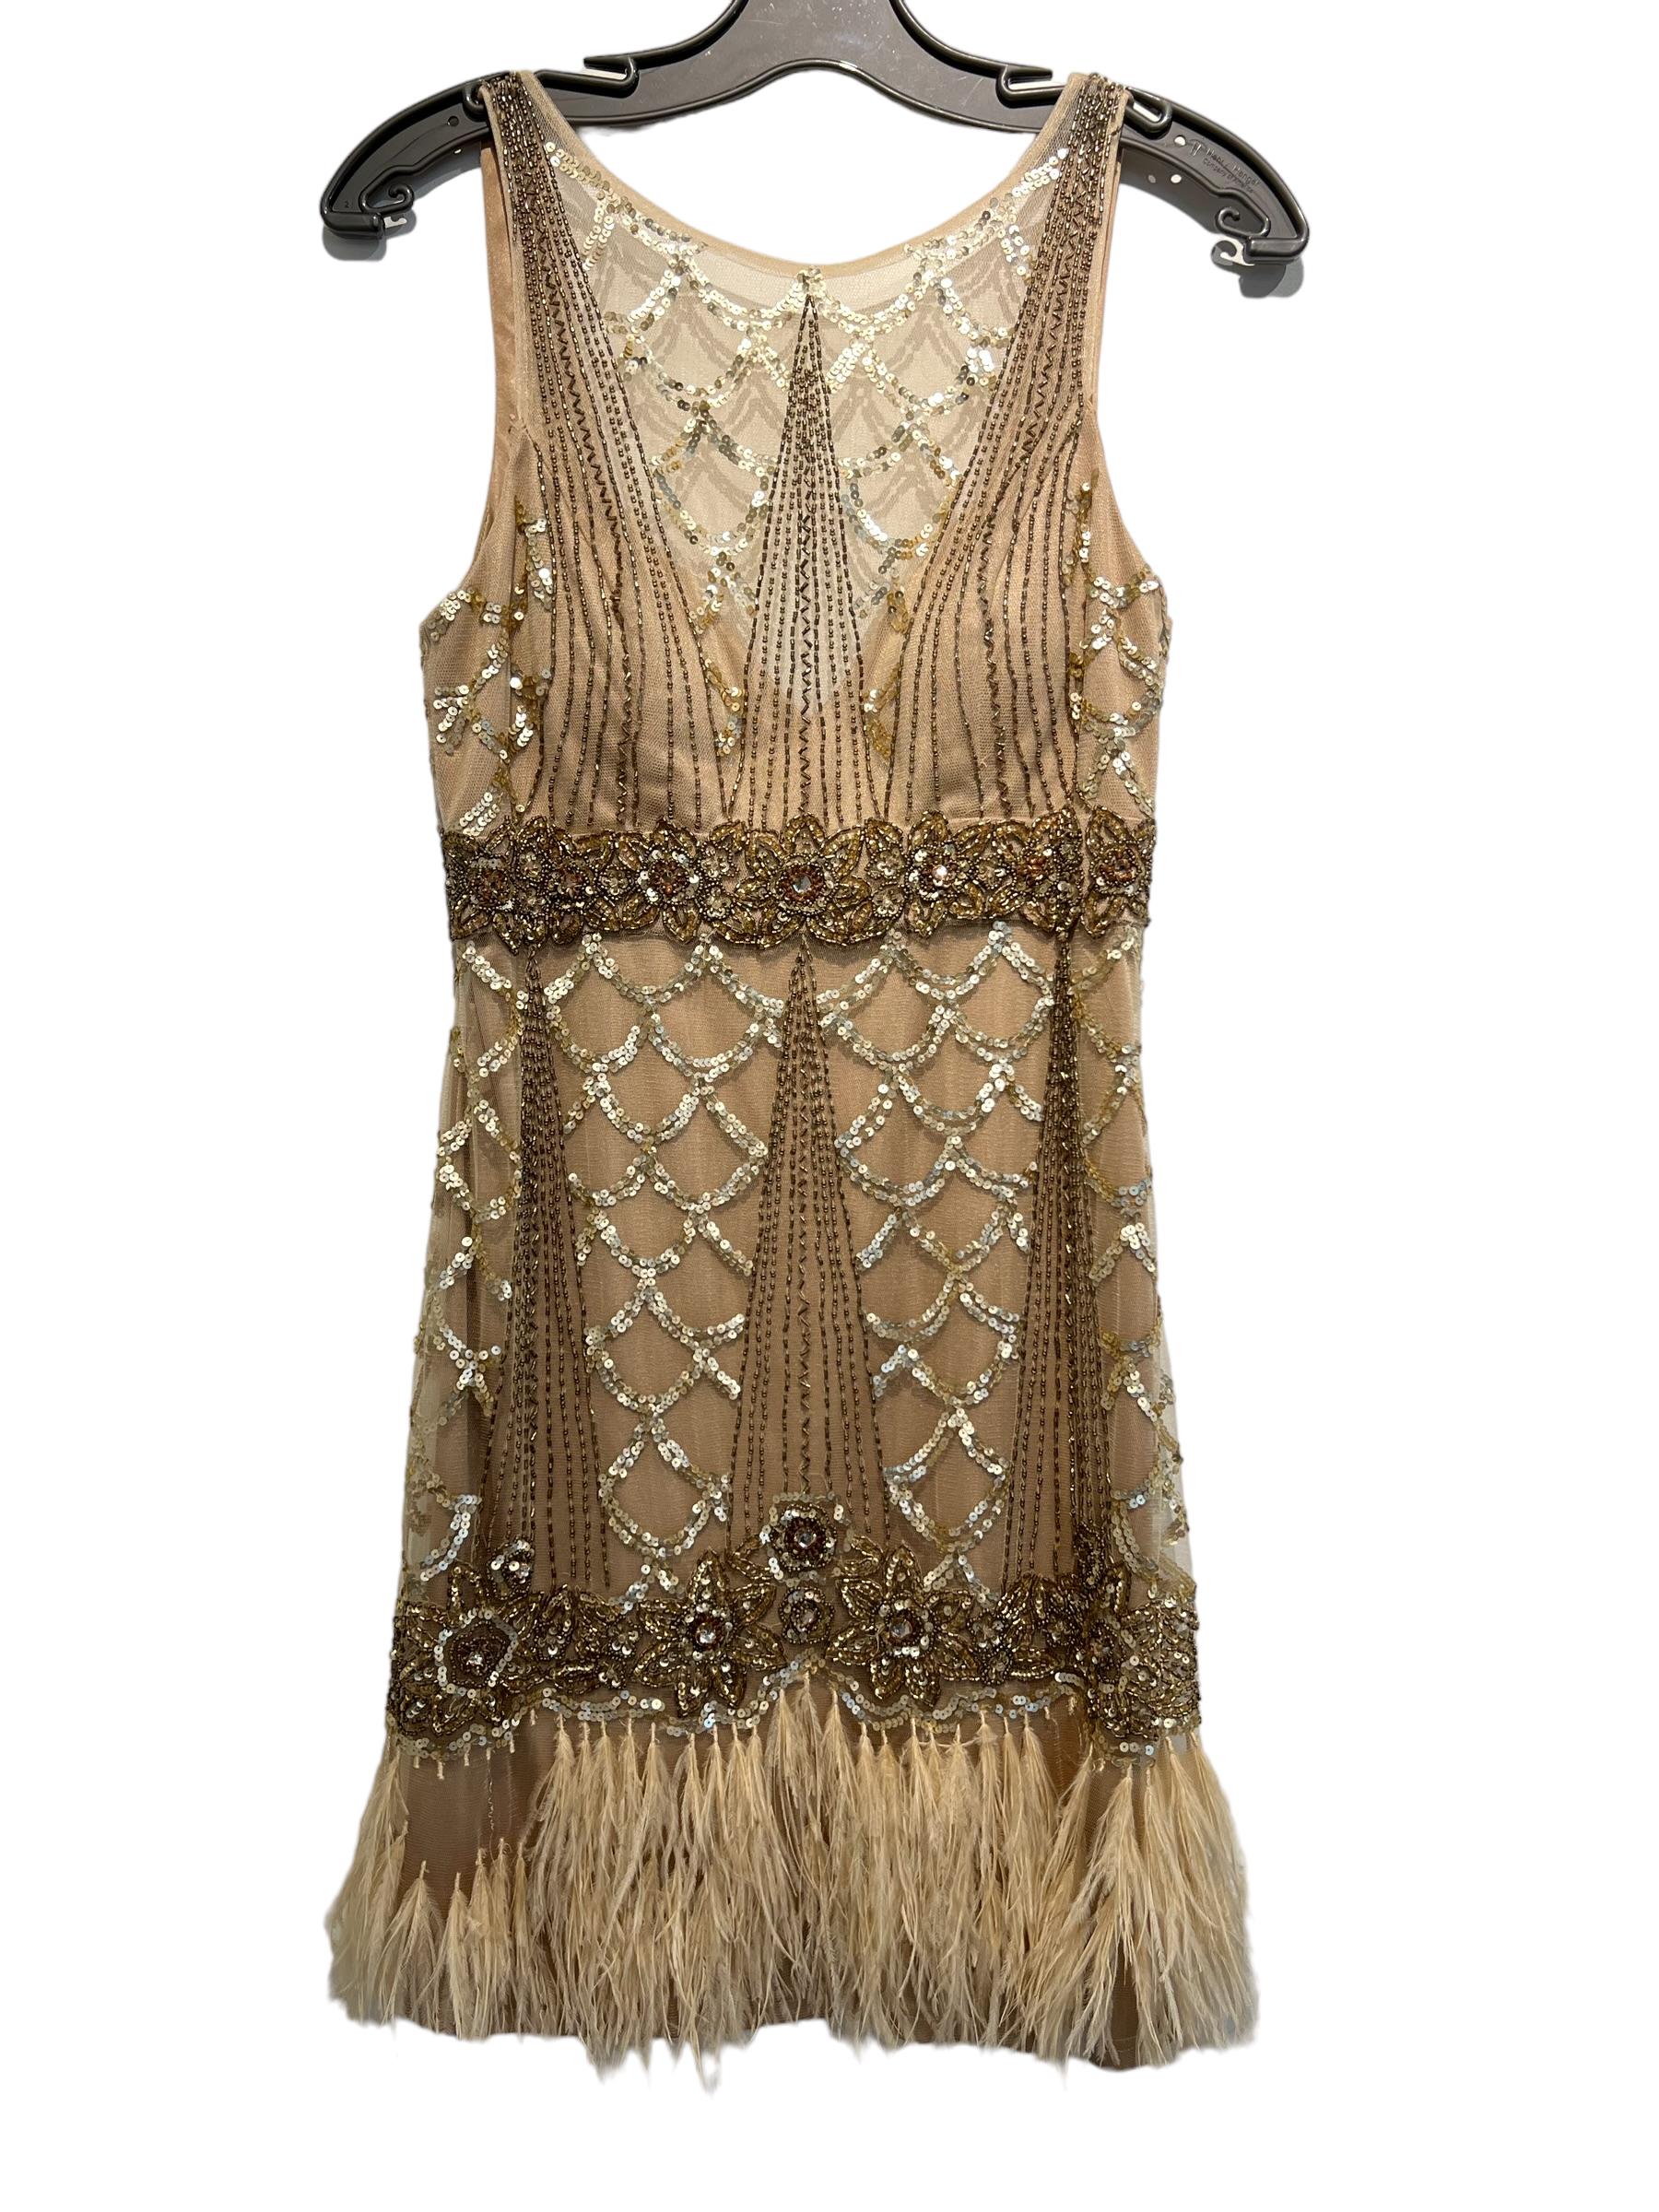 Women's Sue Wang Women´s Beaded with Feathers Dress Size 6